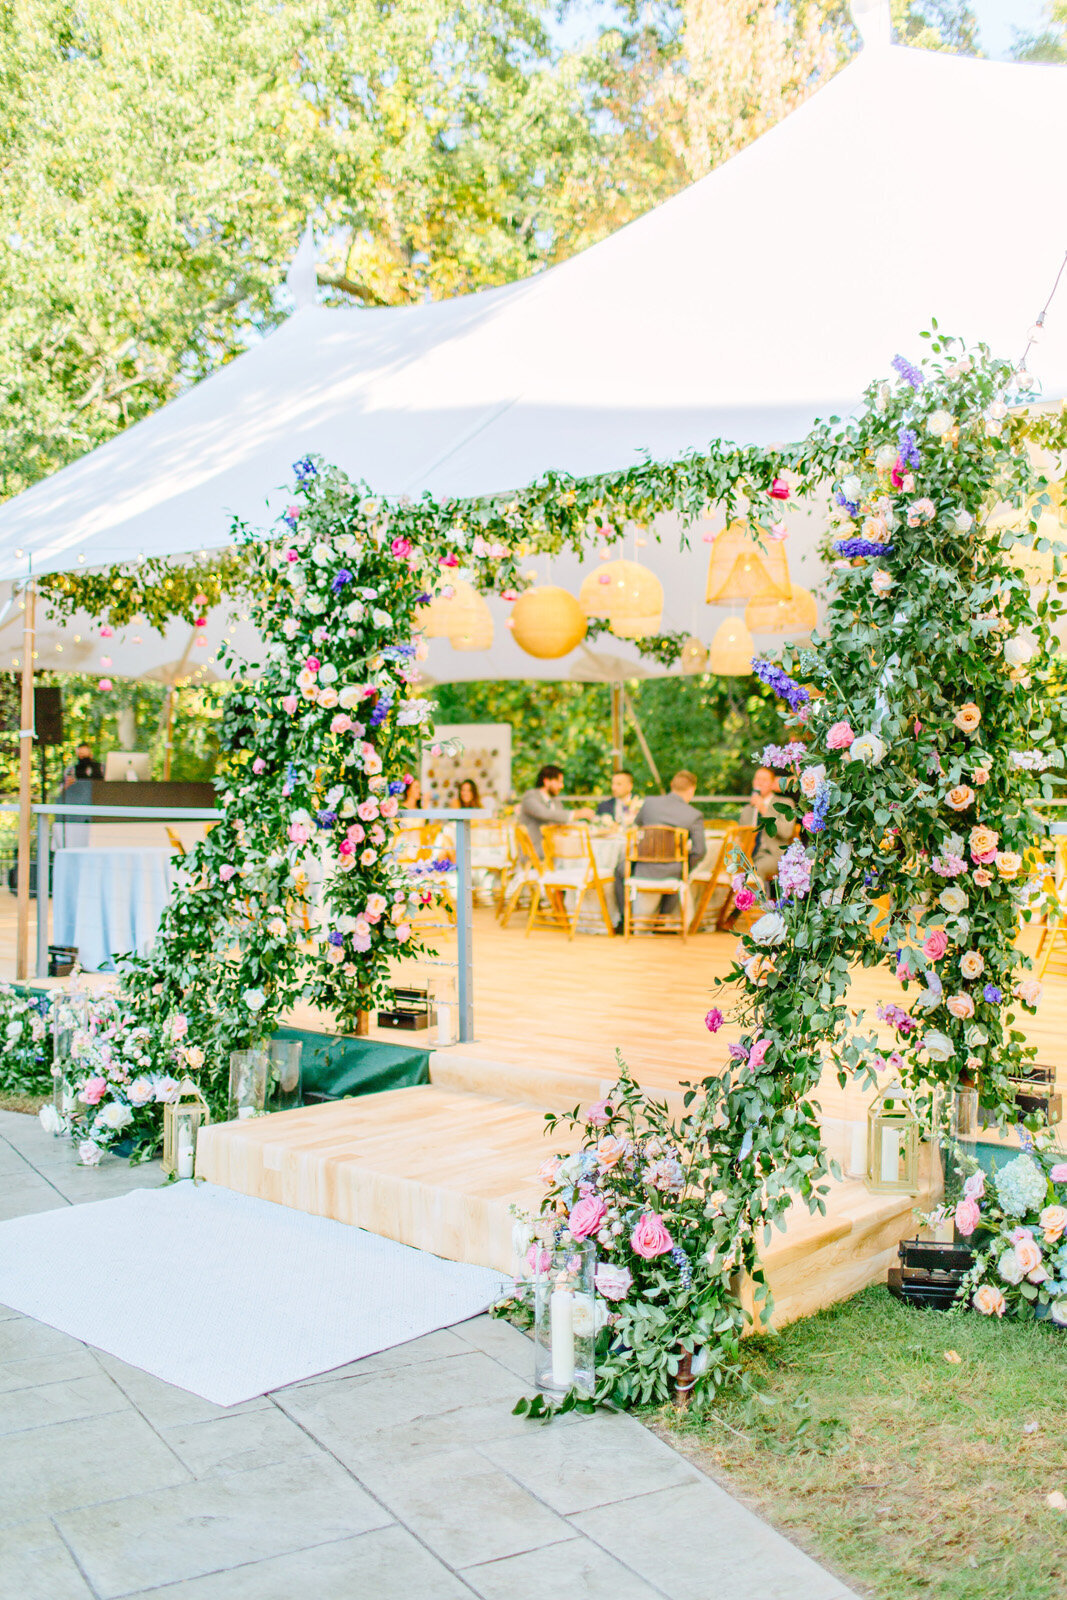 Kate-Murtaugh-Events-private-estate-tented-wedding-planner-rattan-lighting-floating-flowers-greenery-arch-MA